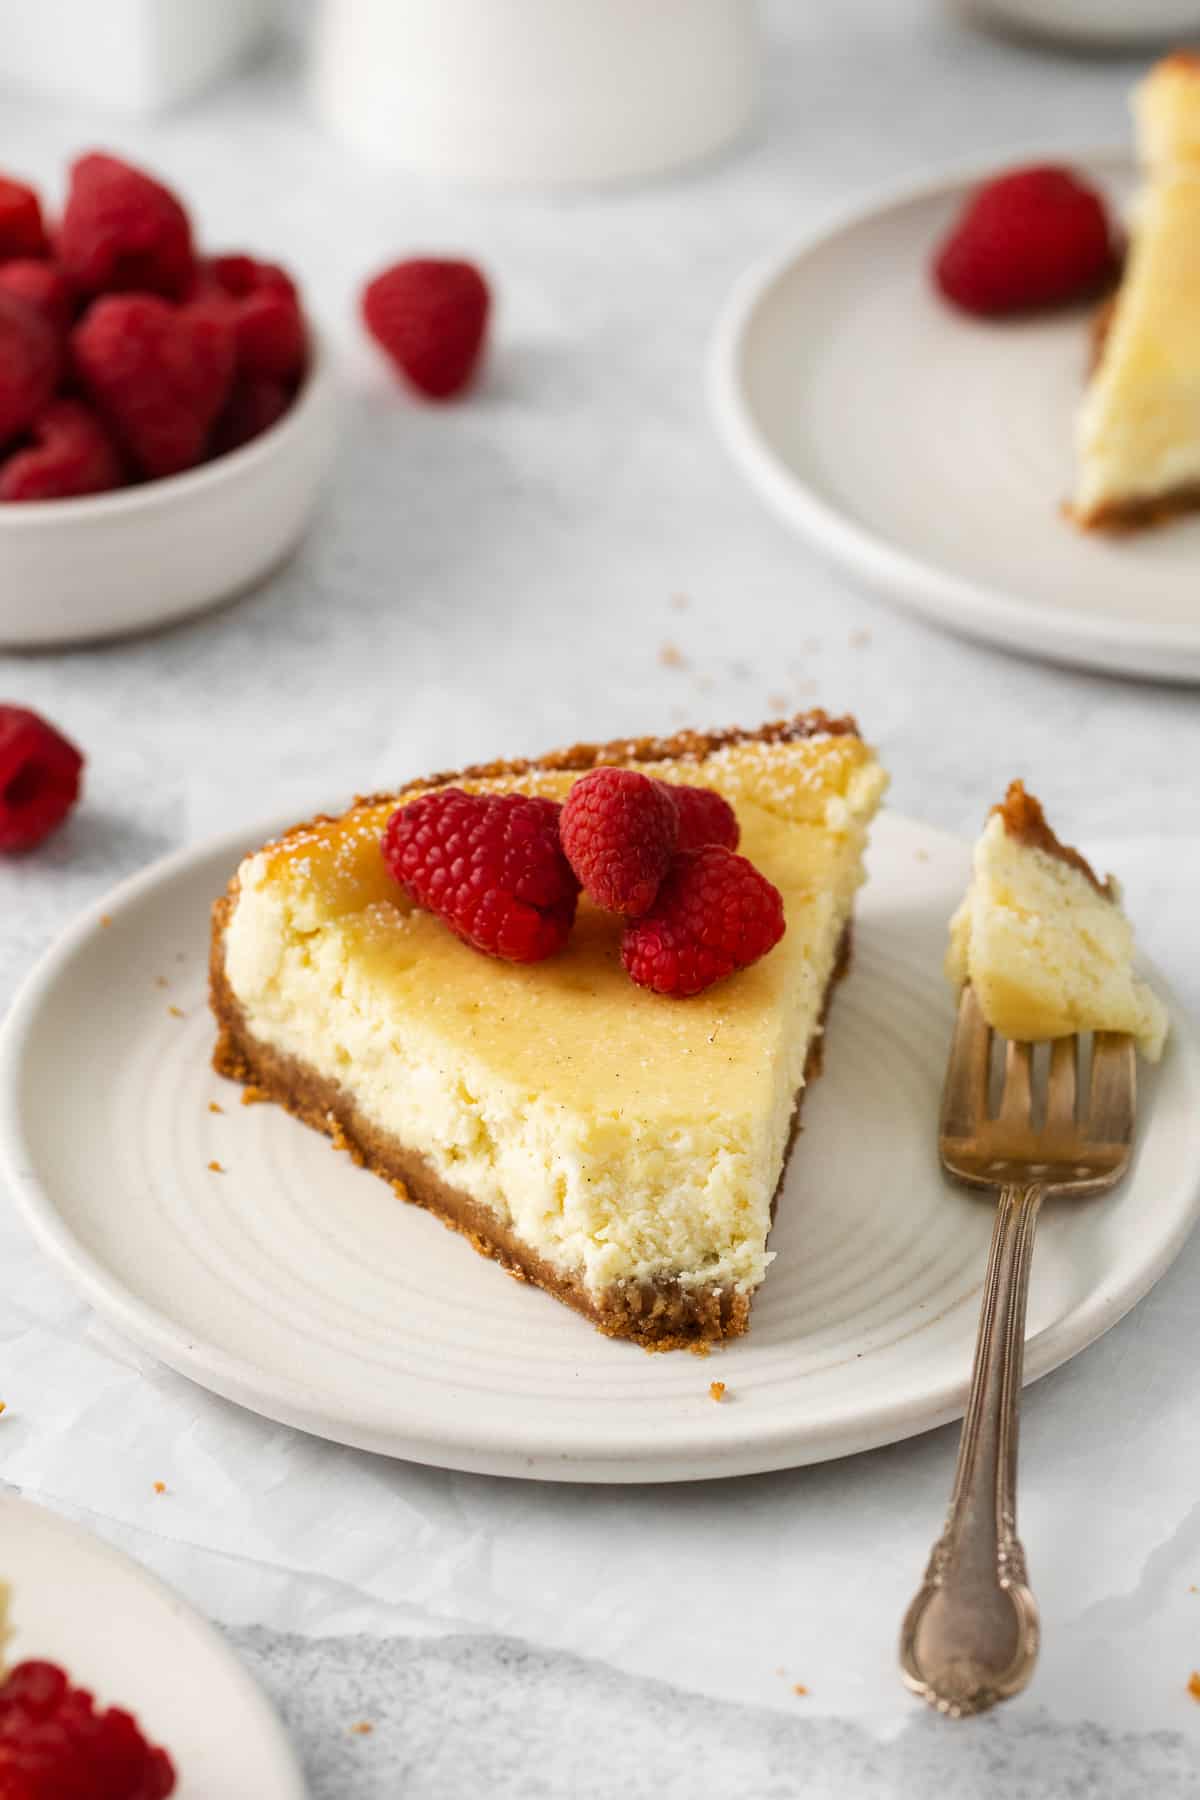 Slice of ricotta cheesecake on a plate.